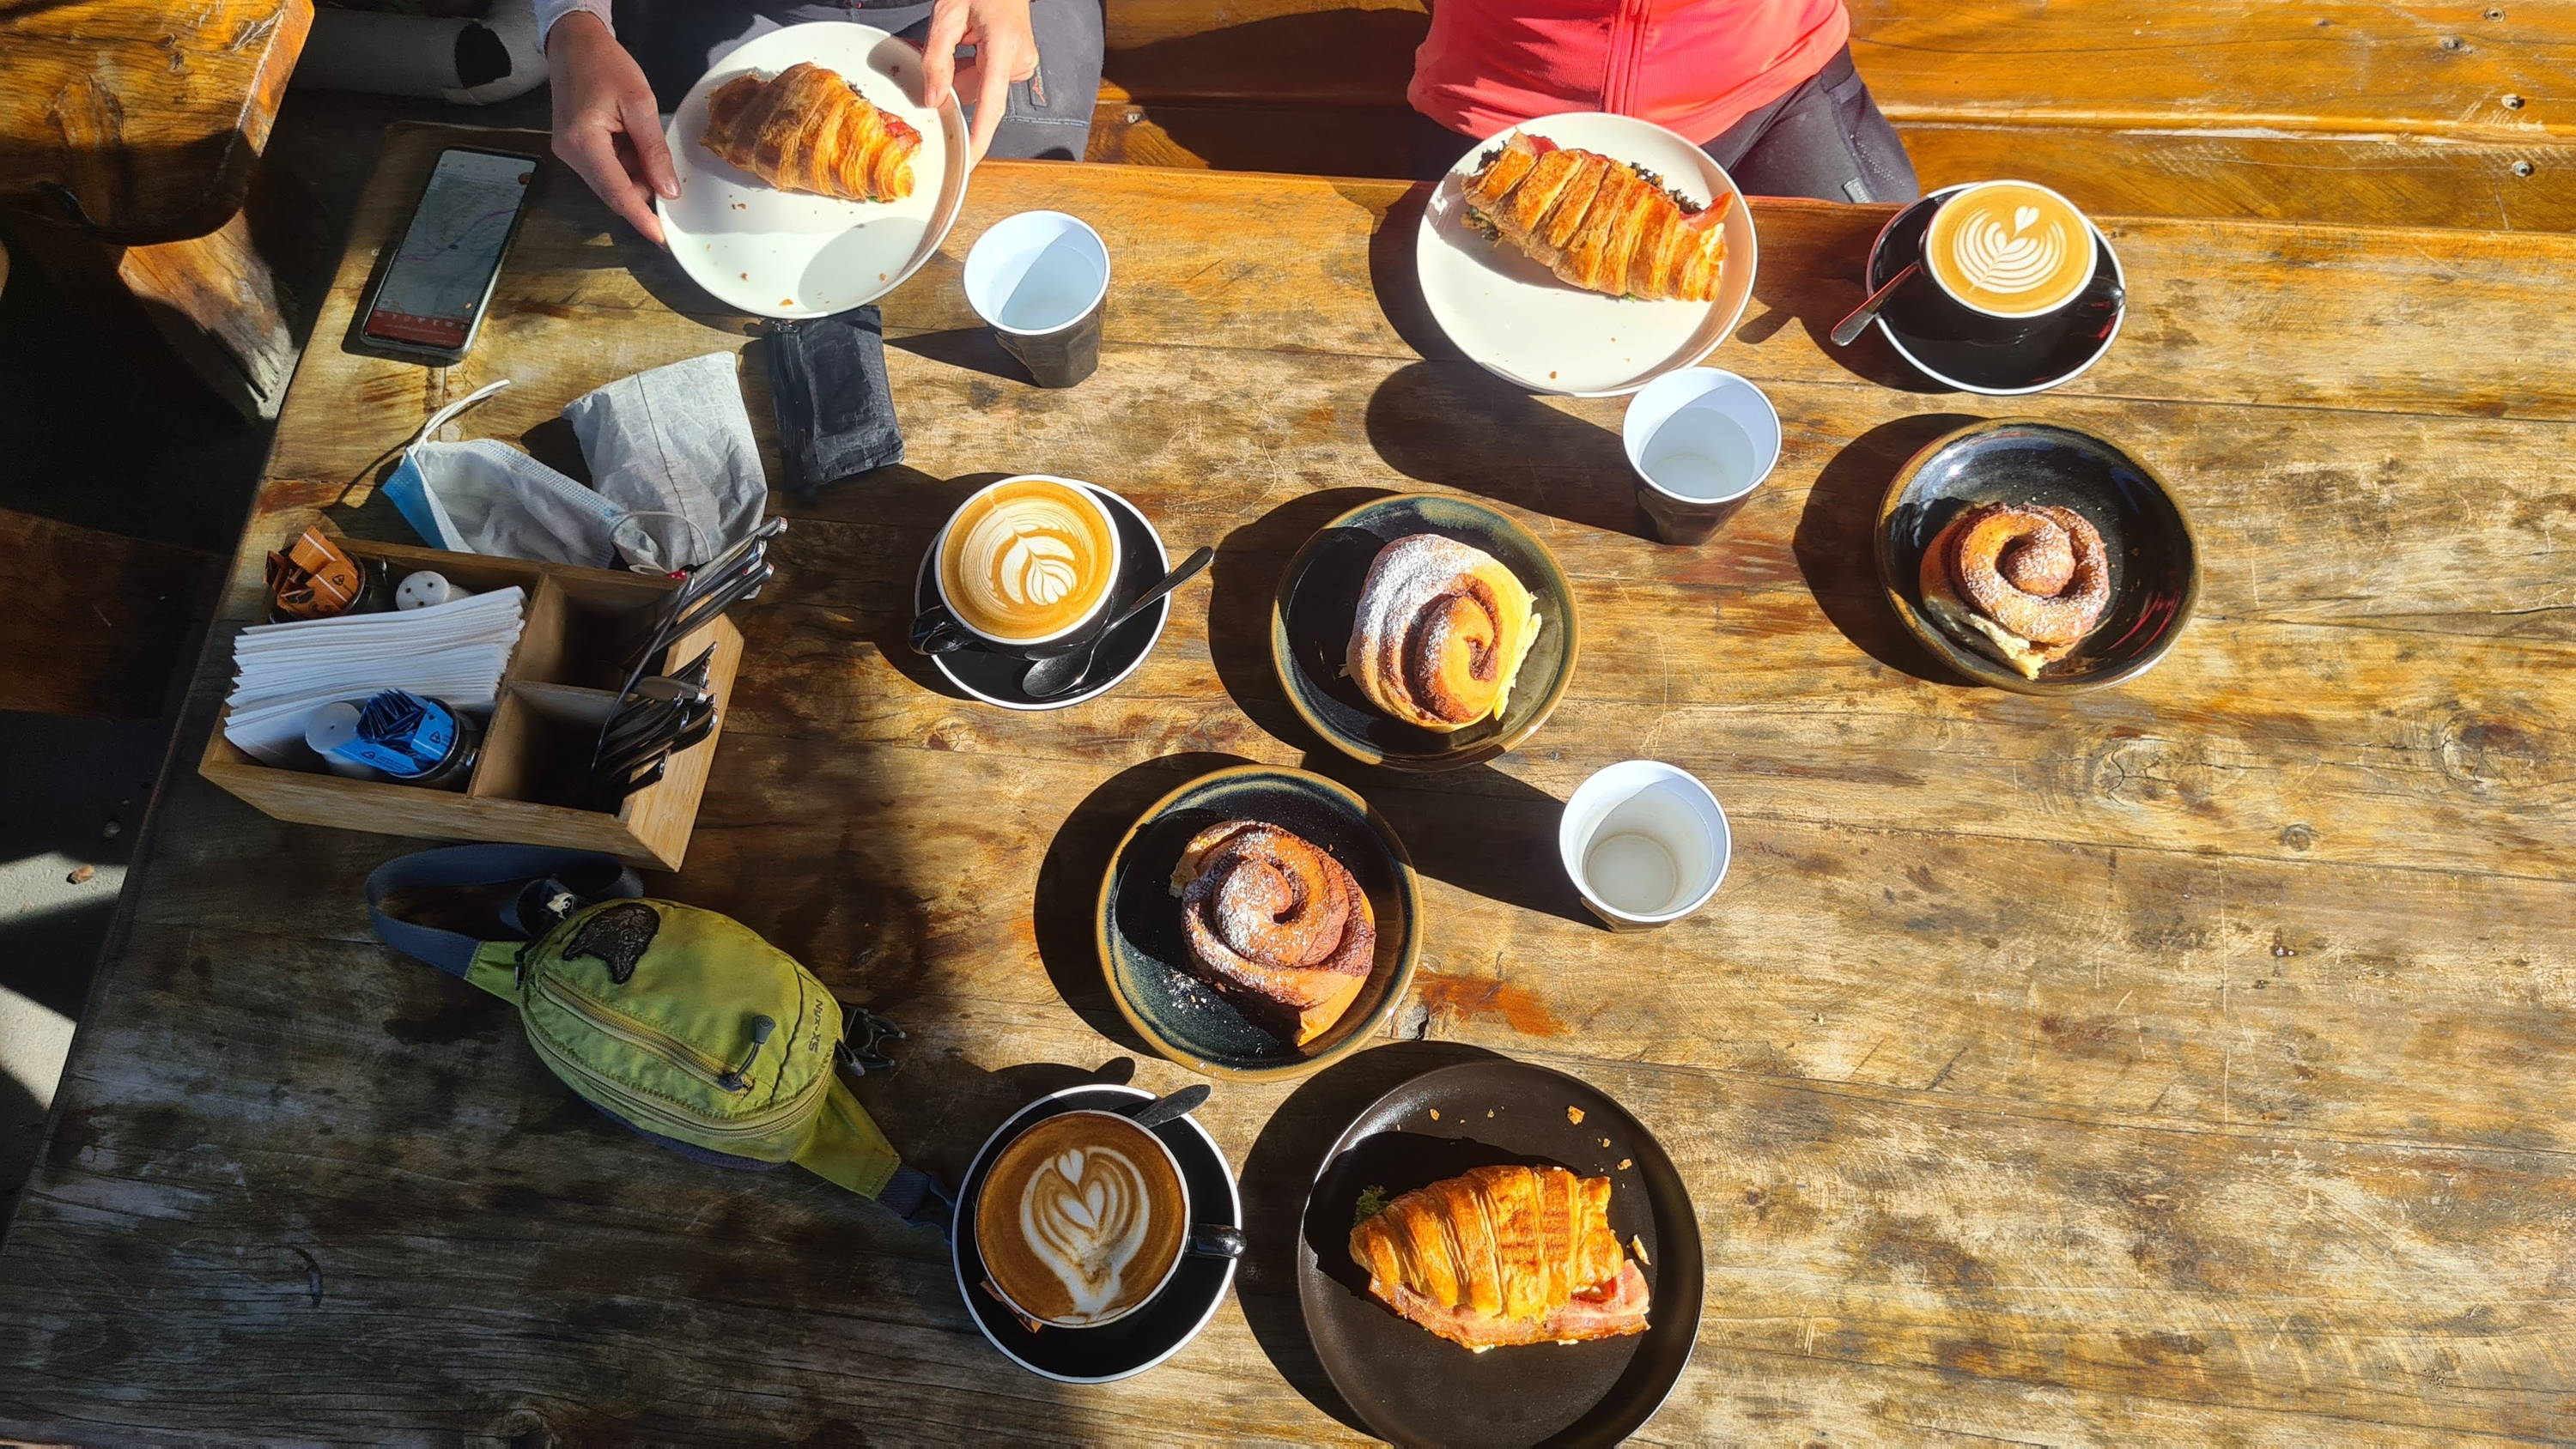 A warm breakfast of croissants, lattes, and sweet buns are laid out on a wooden table.